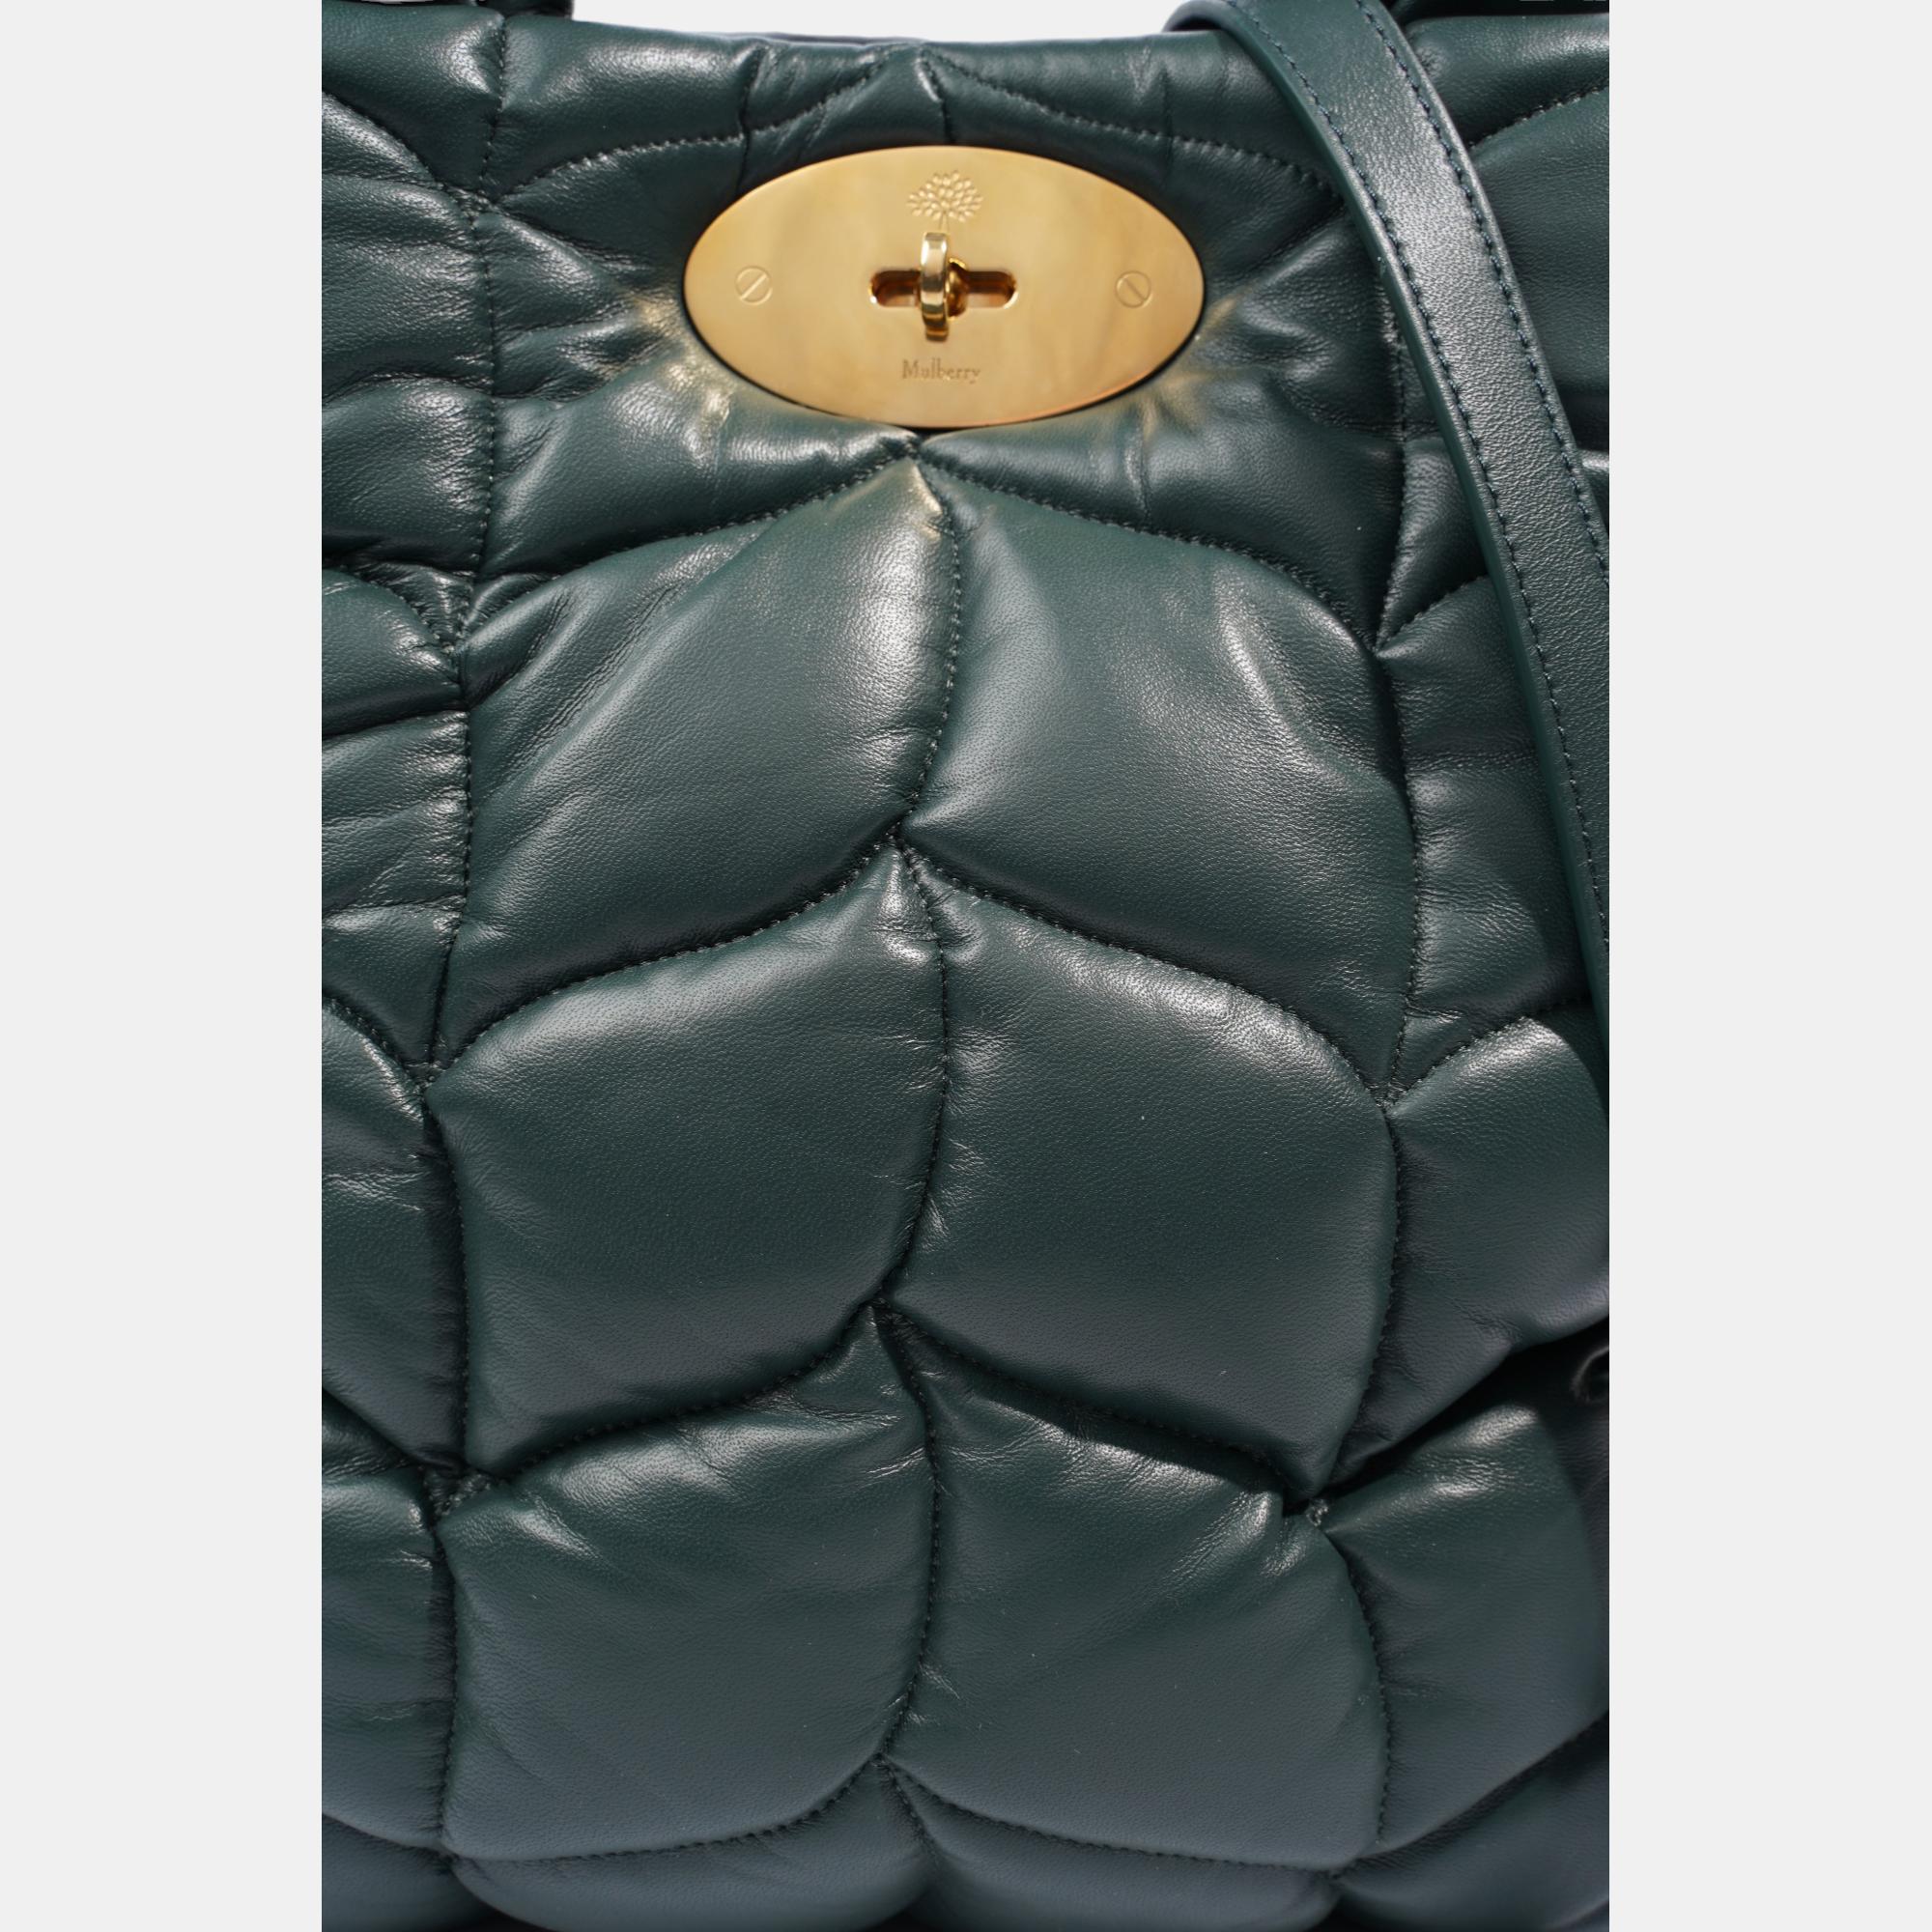 Mulberry Big Softie Green Leather